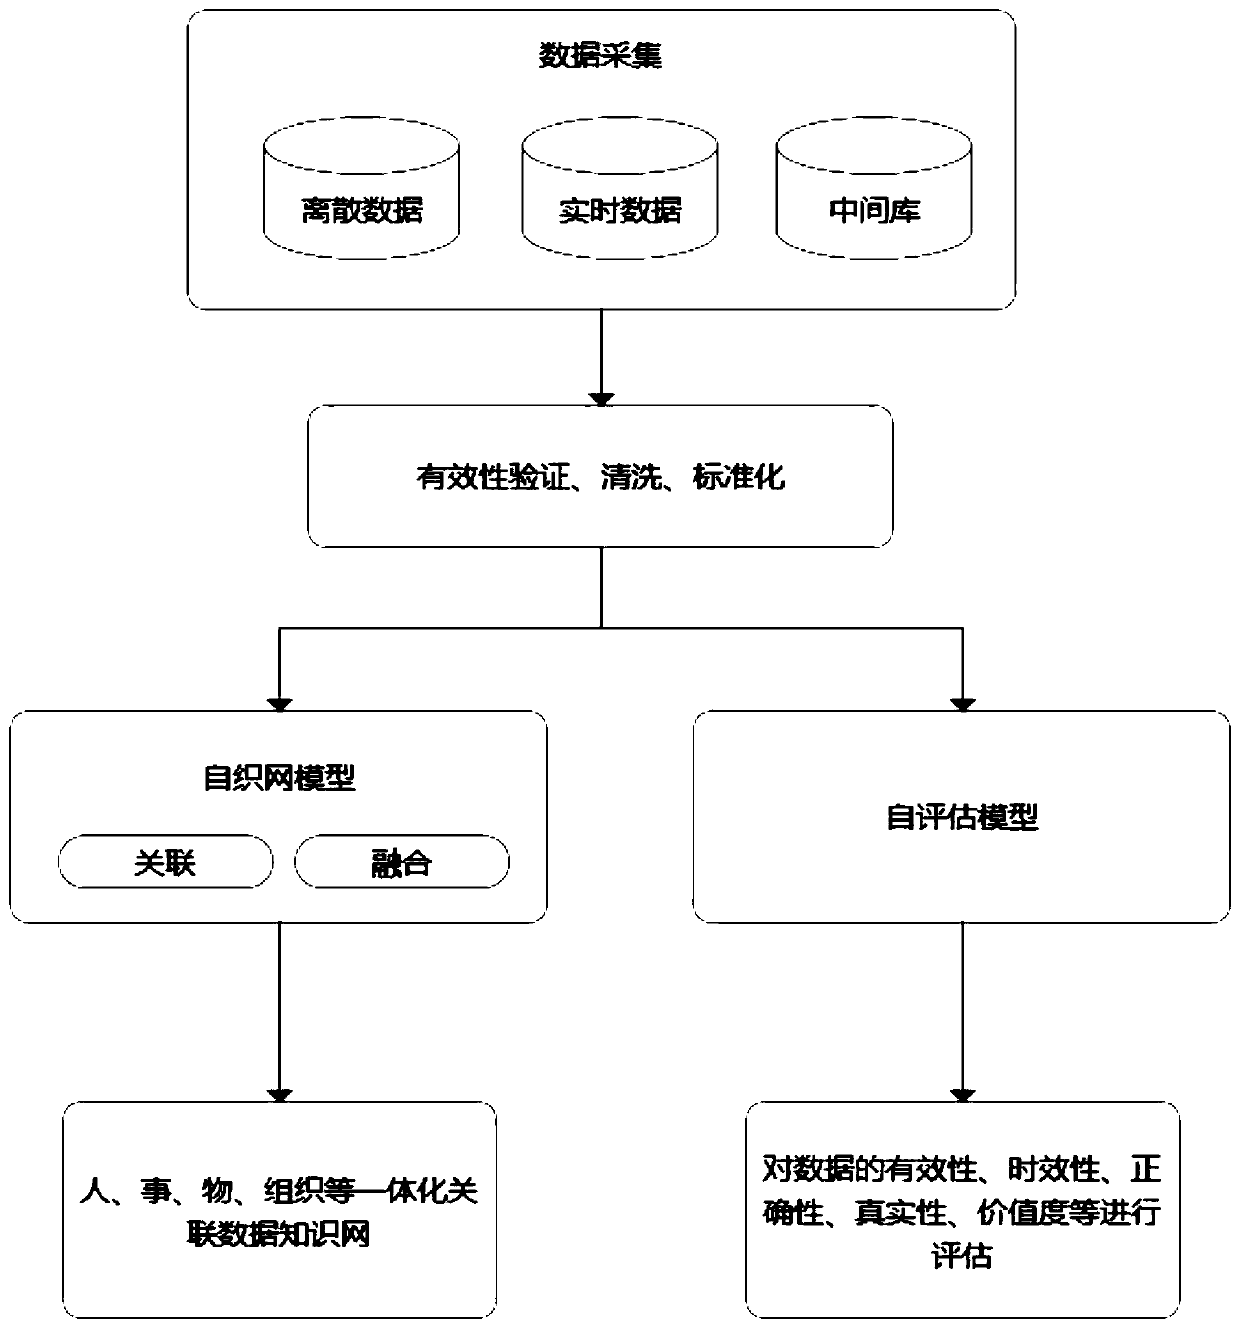 Teaching comment and recommendation system and method based on data mining